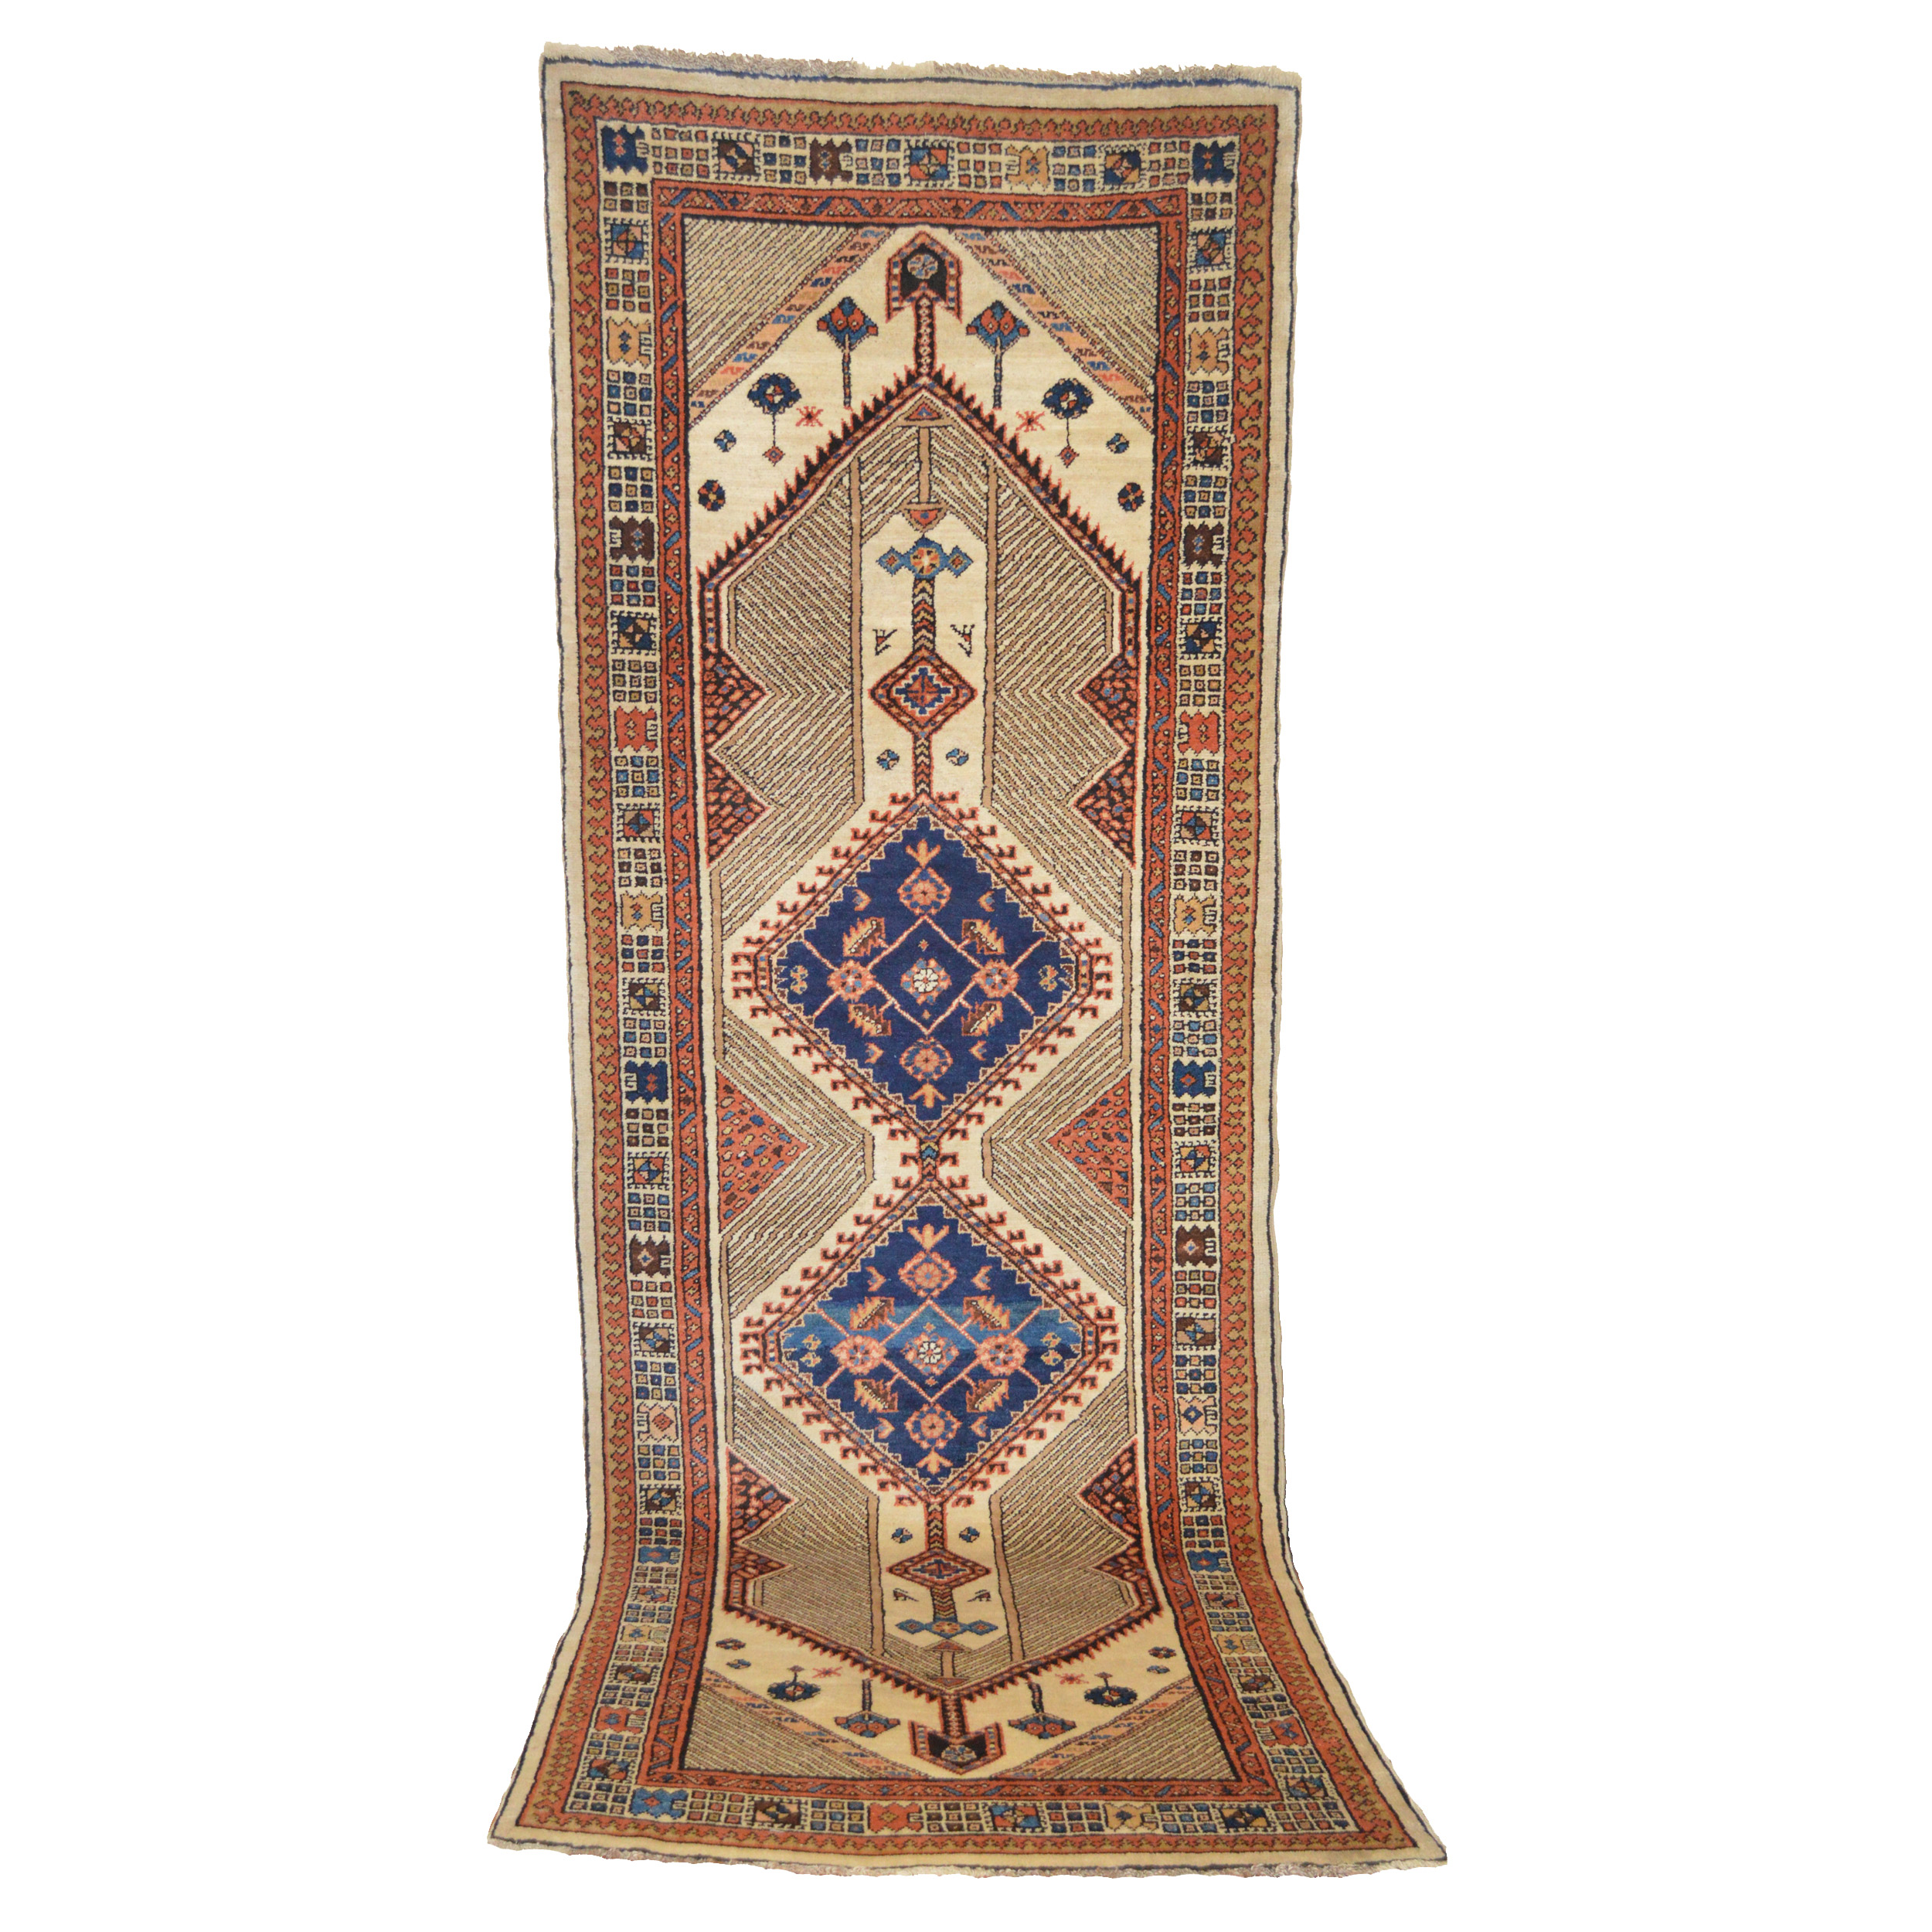 An antique Persian Serab rug with two mid blue medallions on an ivory field that is also decorated with camel color zig zag lines. A light green and soft red outer Reciprocal Trefoil border and an ivory major border with geometric motifs frame the field. Douglas Stock Gallery, antique Oriental rugs Boston,Ma area, antique Persian runners